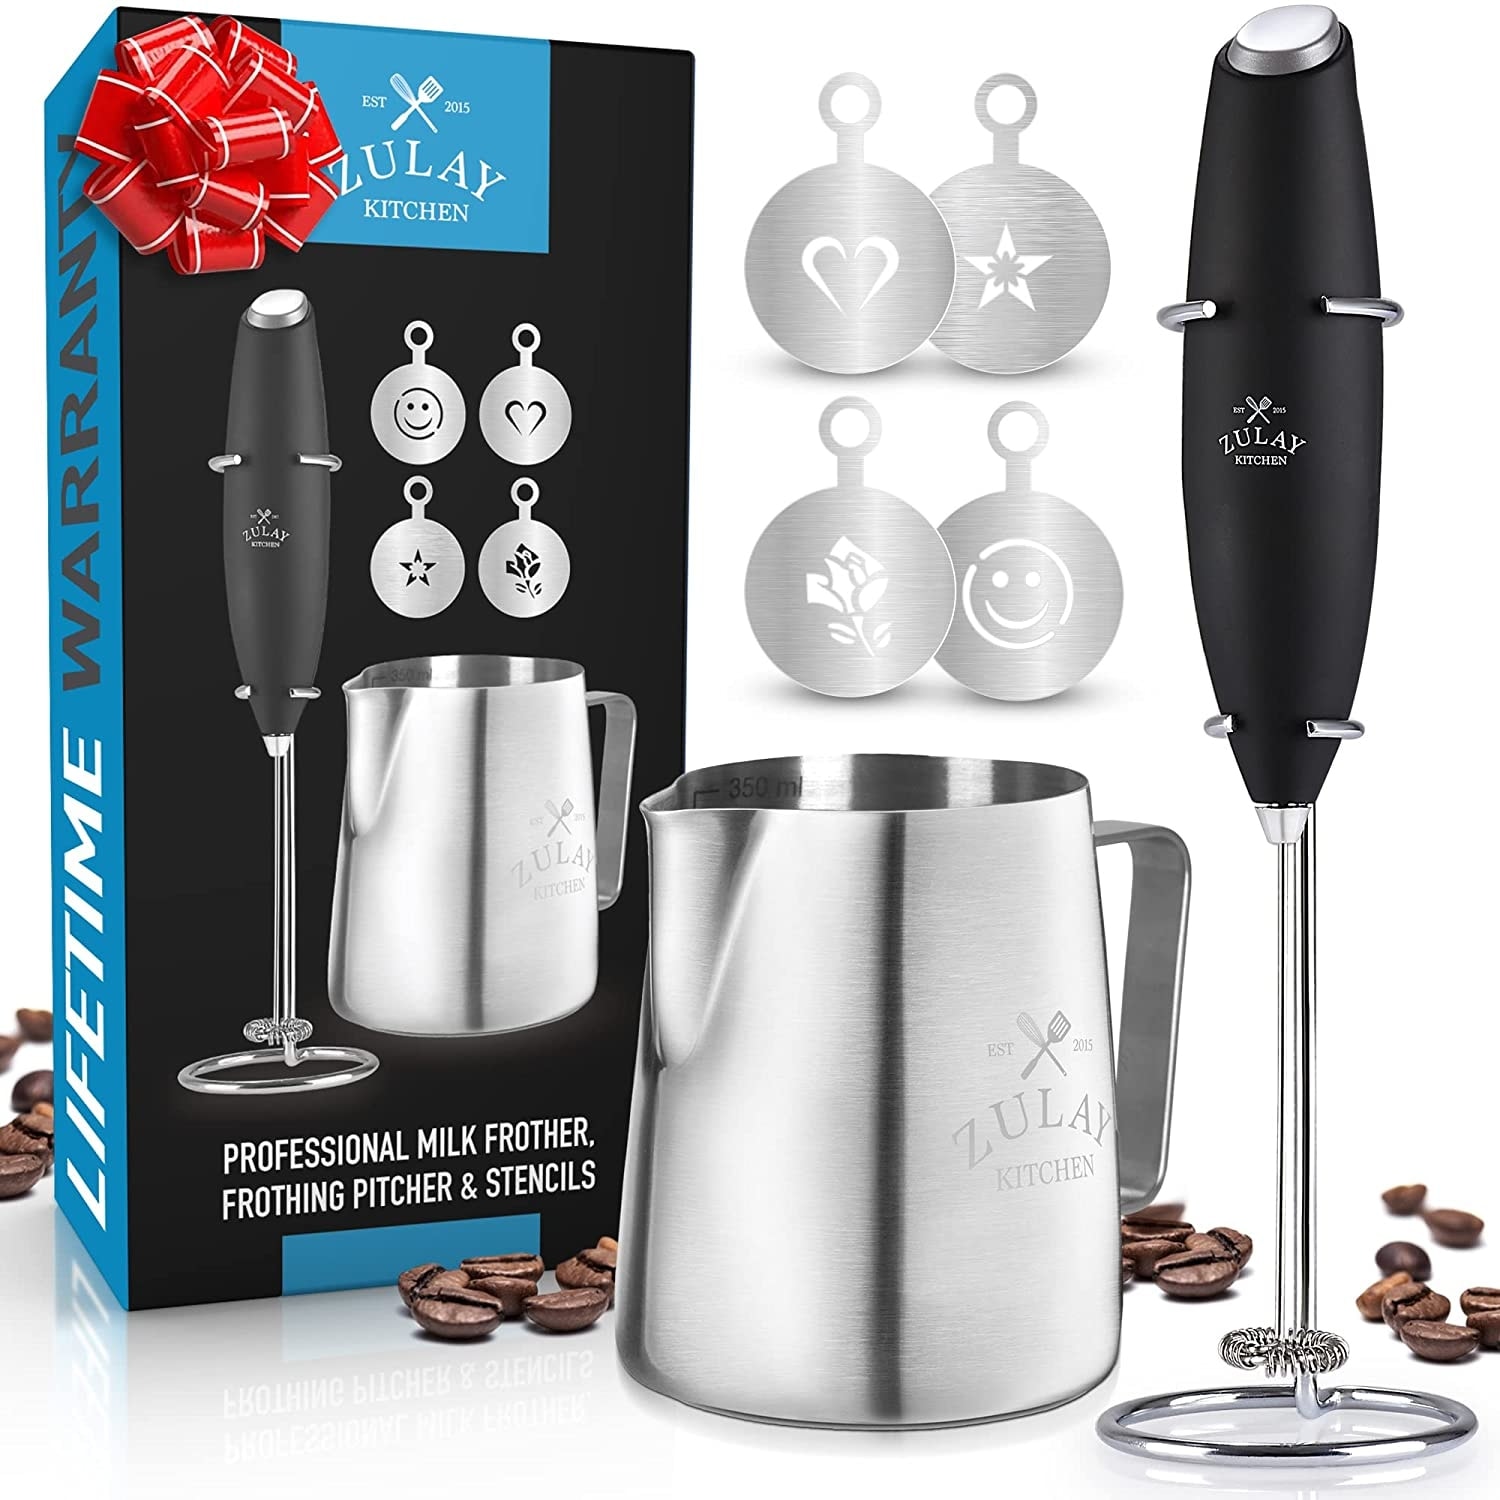 https://ak1.ostkcdn.com/images/products/is/images/direct/4024ea802333af628a8617d375297a57193cb8ae/Zulay-Kitchen-Milk-Frother-Complete-Set.jpg